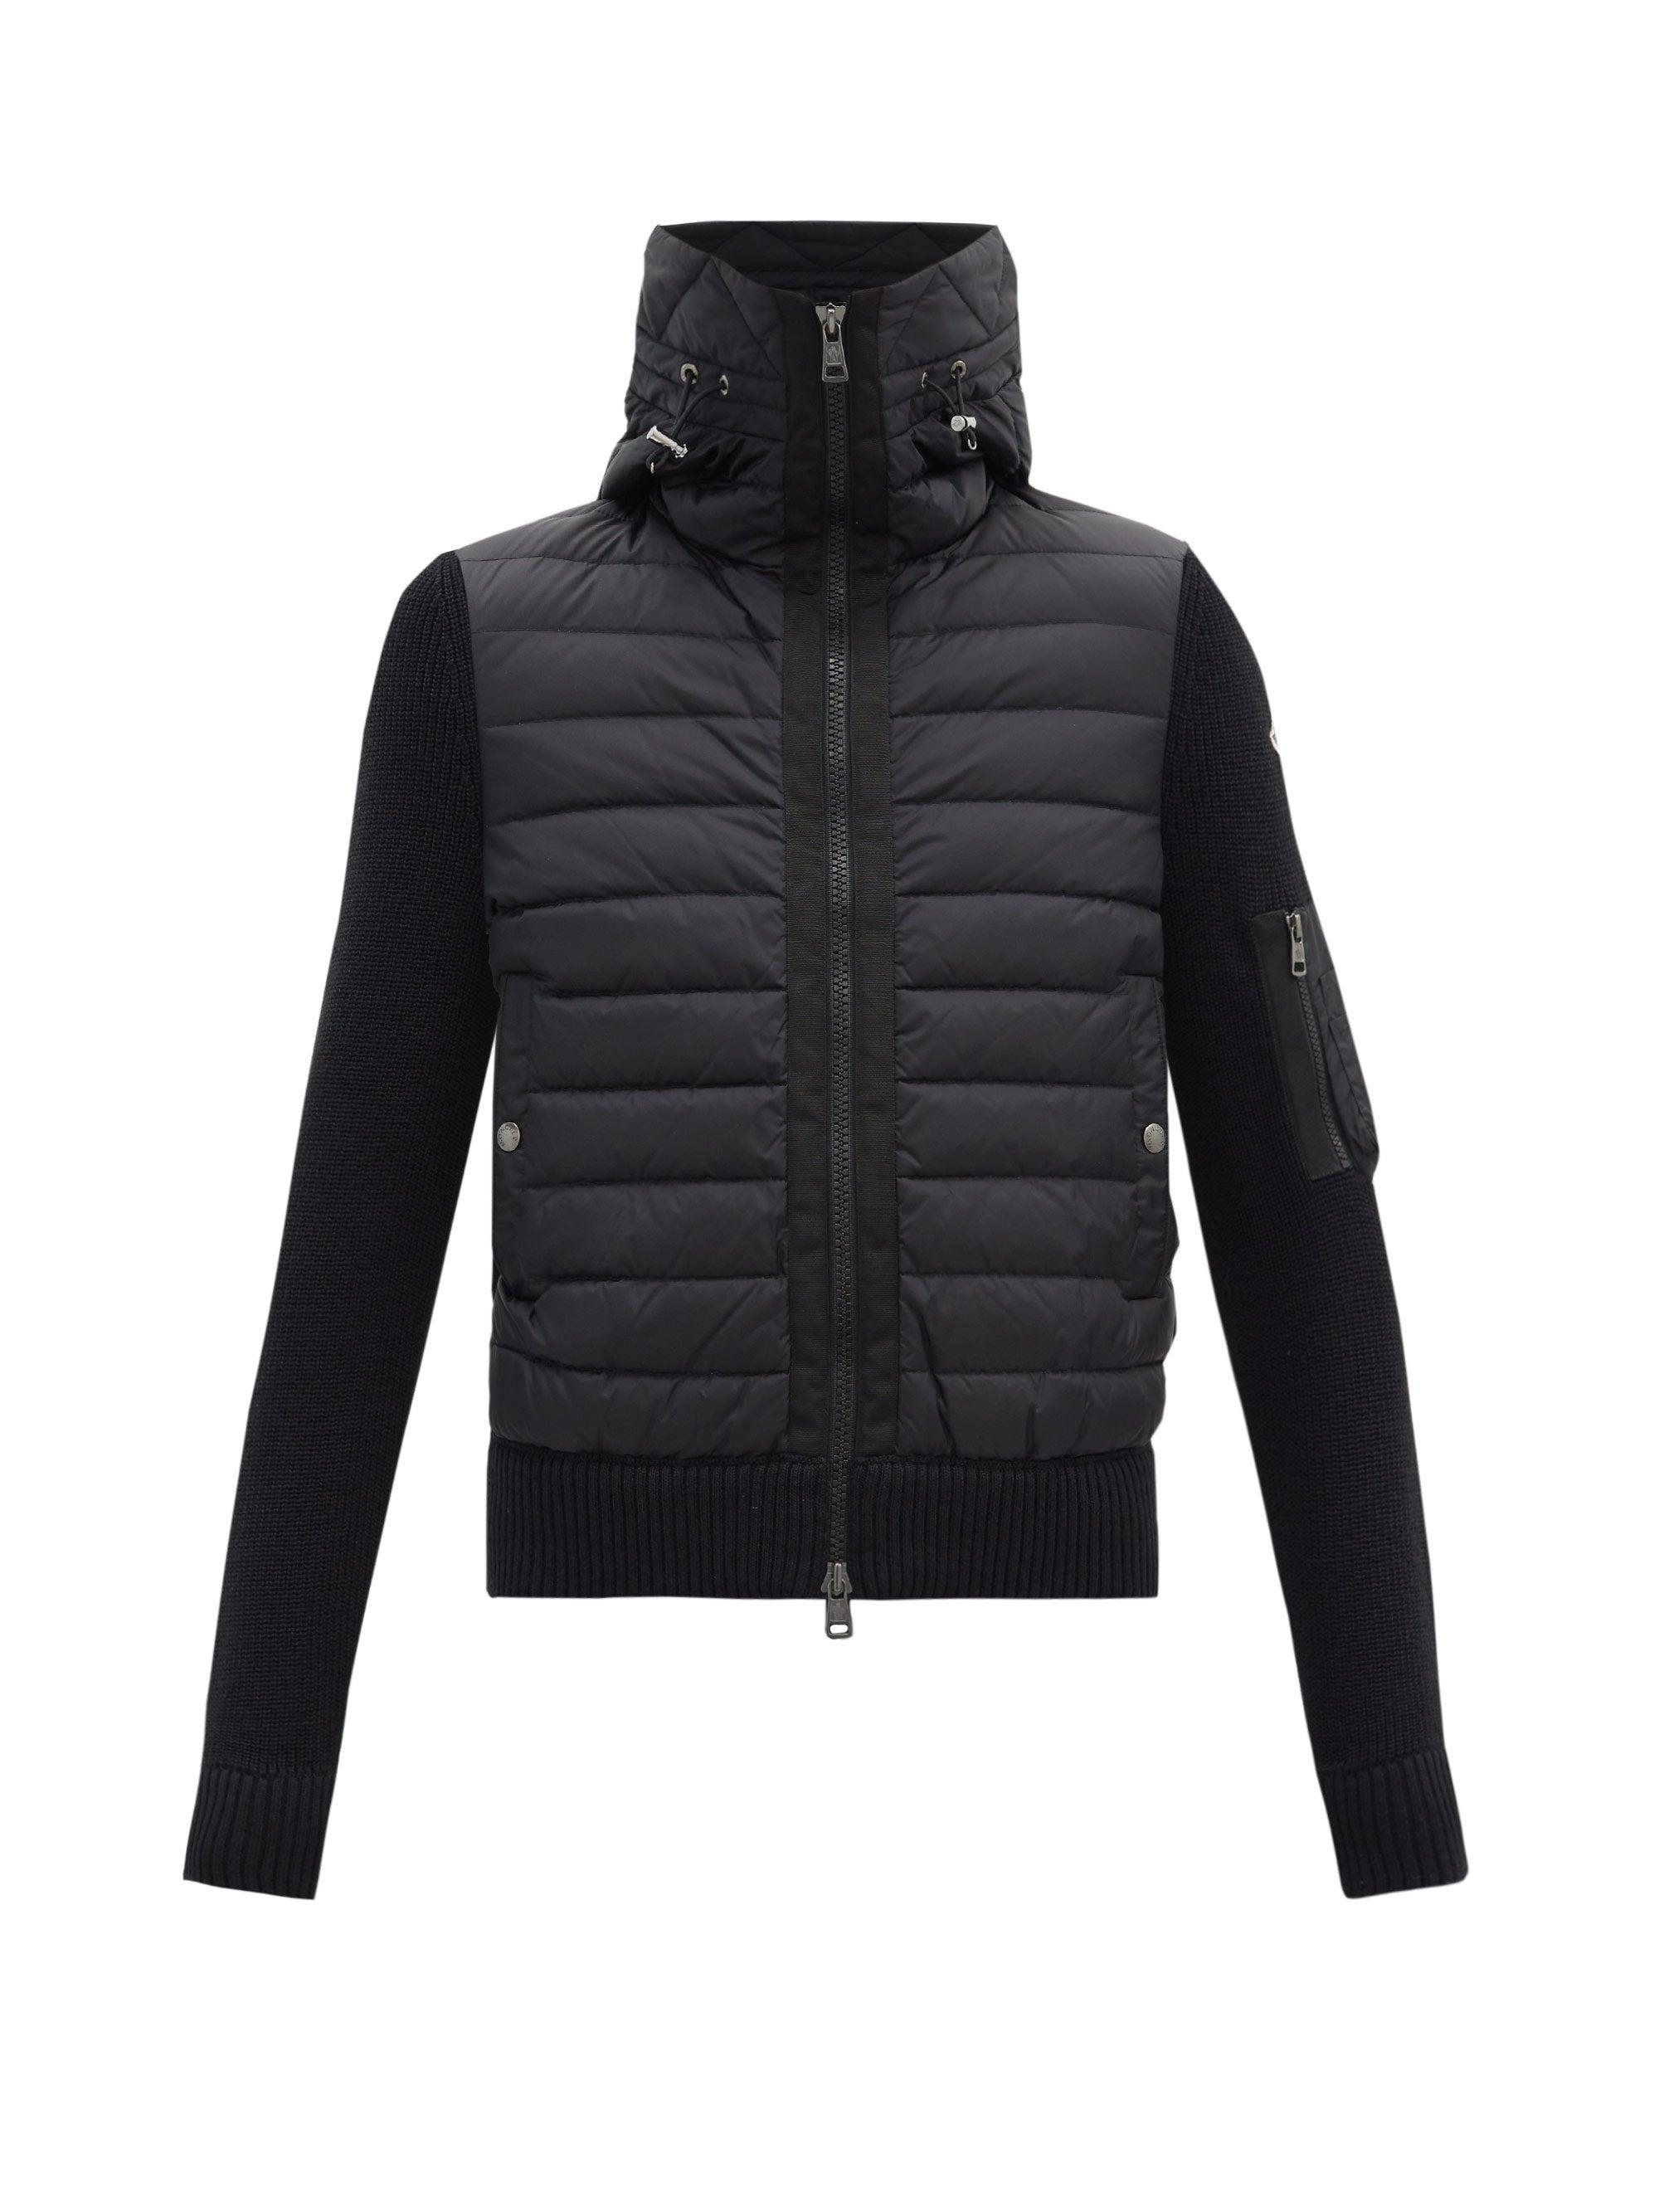 Moncler Down-quilted Wool-blend Hooded Cardigan in Black for Men - Lyst